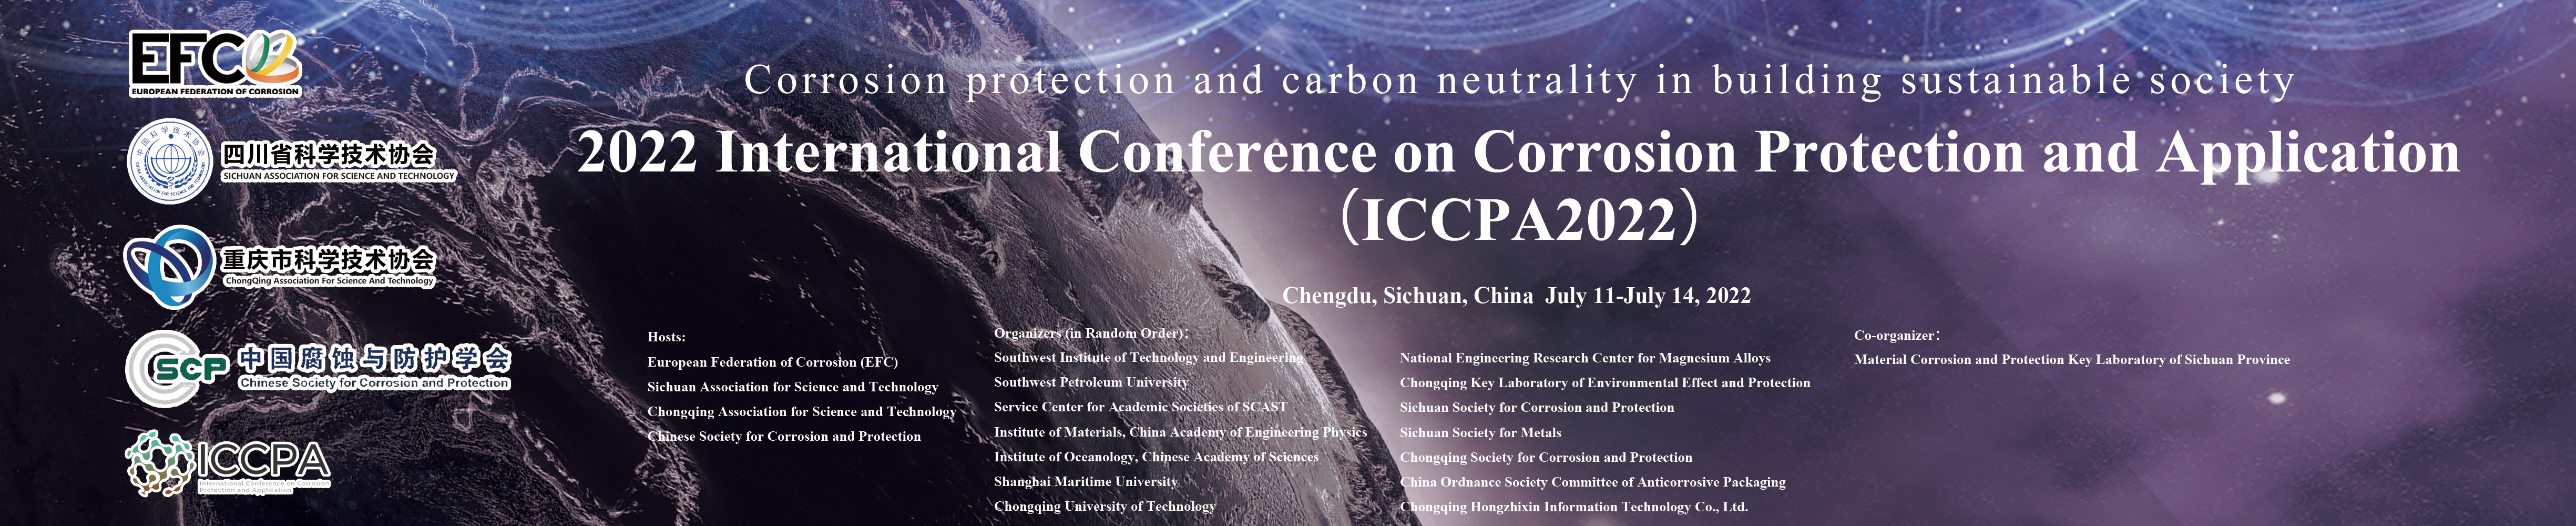 2022 International Conference on Corrosion Protection and Application（ICCPA2022）